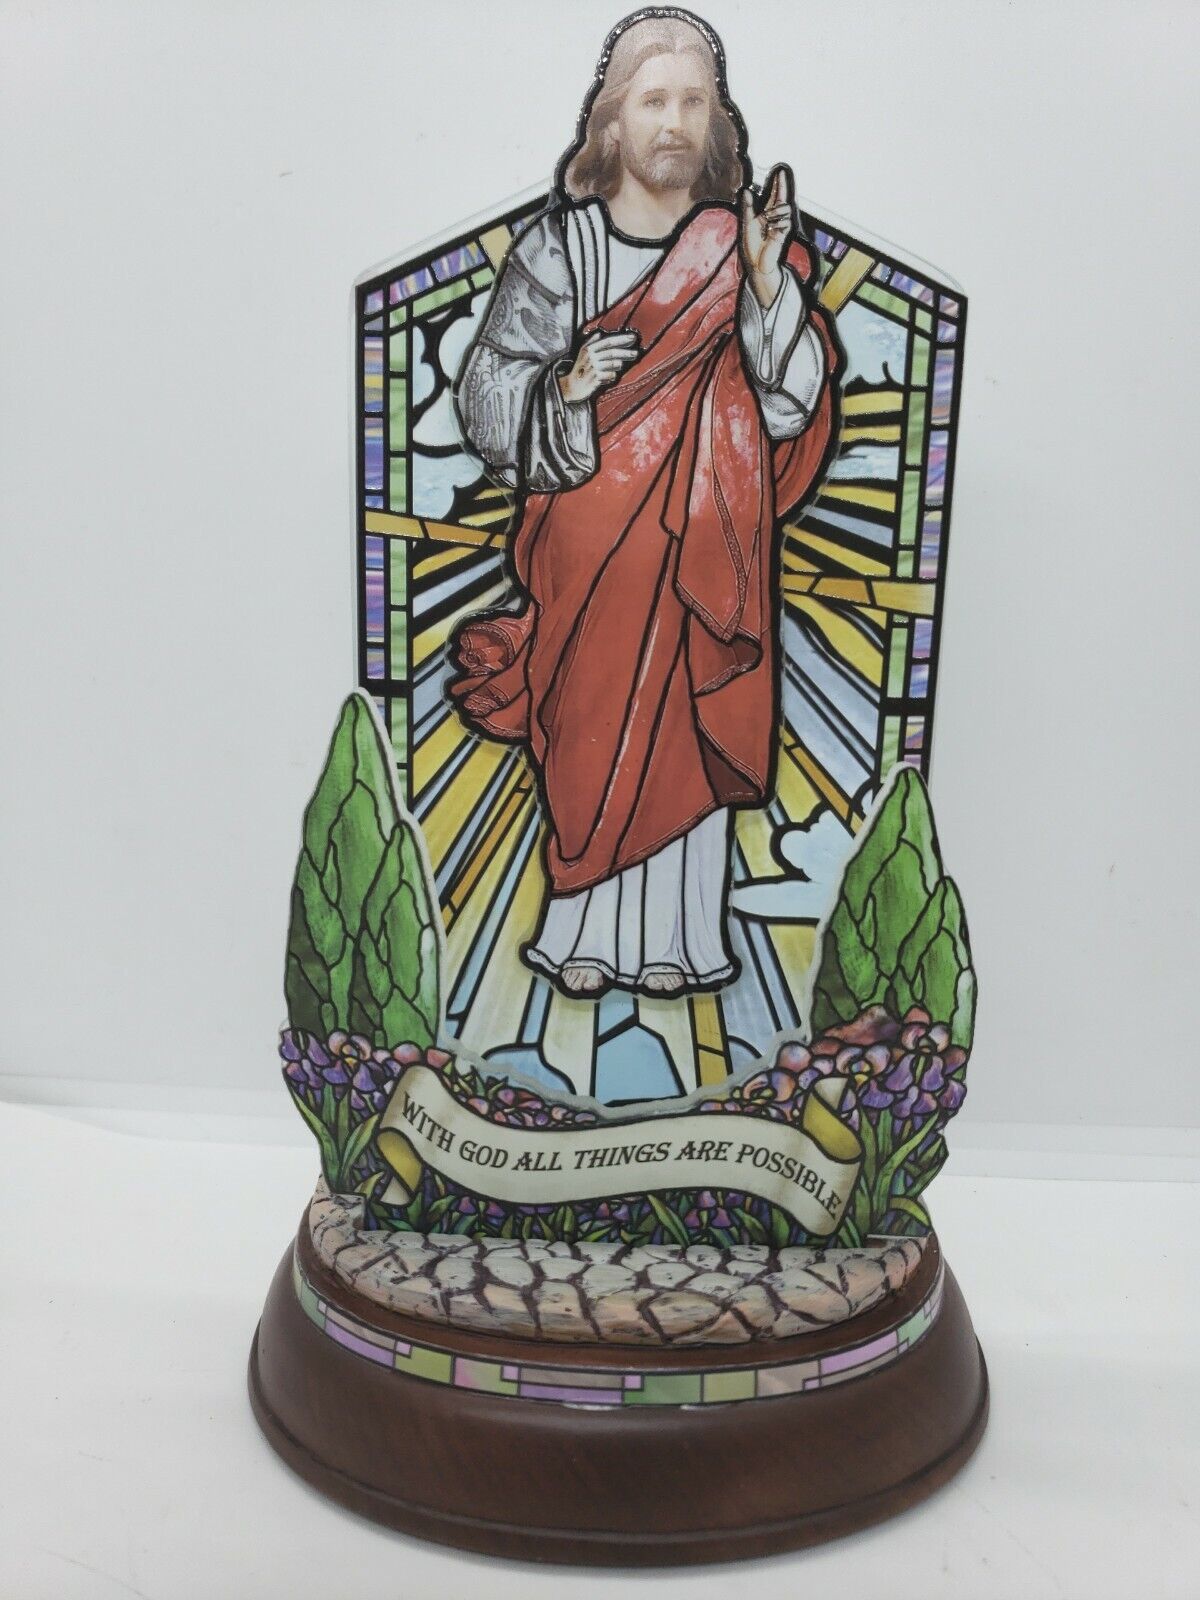 NEW Bradford Exchange Stained Glass Sculpture Collection w/God All Things Are Po